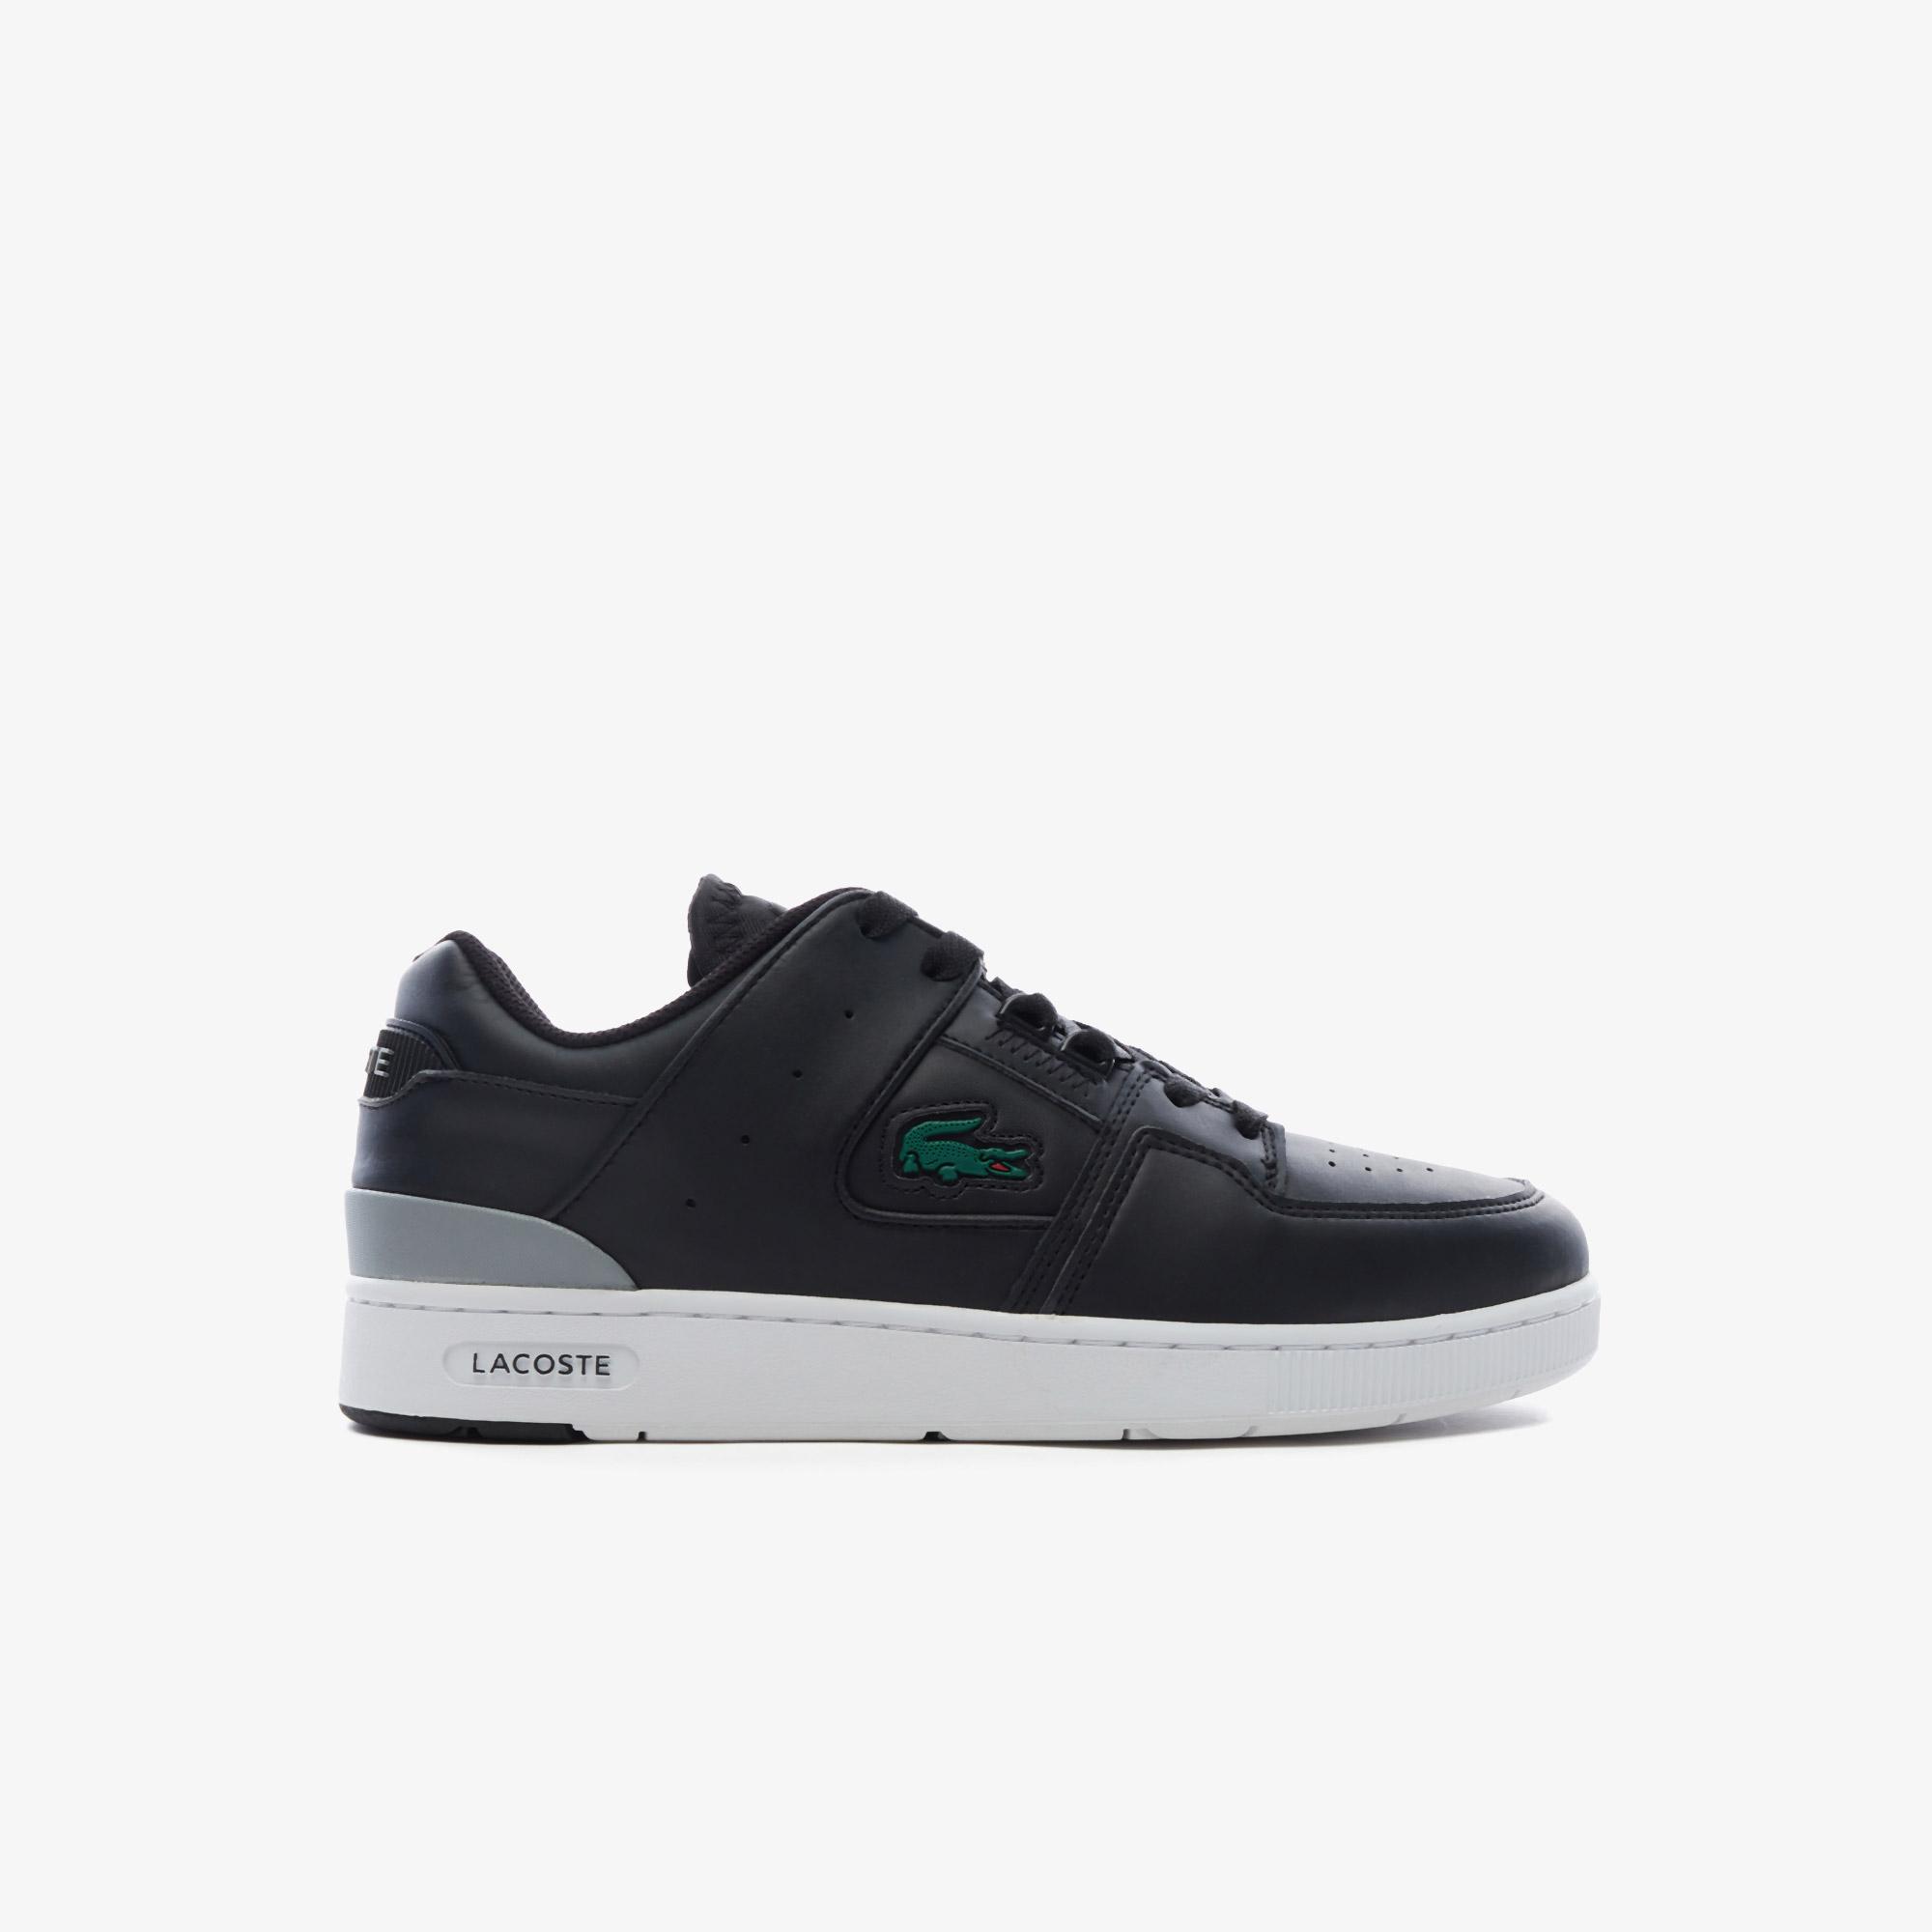 Lacoste Sneakers - Game Advance - 745SFA0026-216 - Online shop for